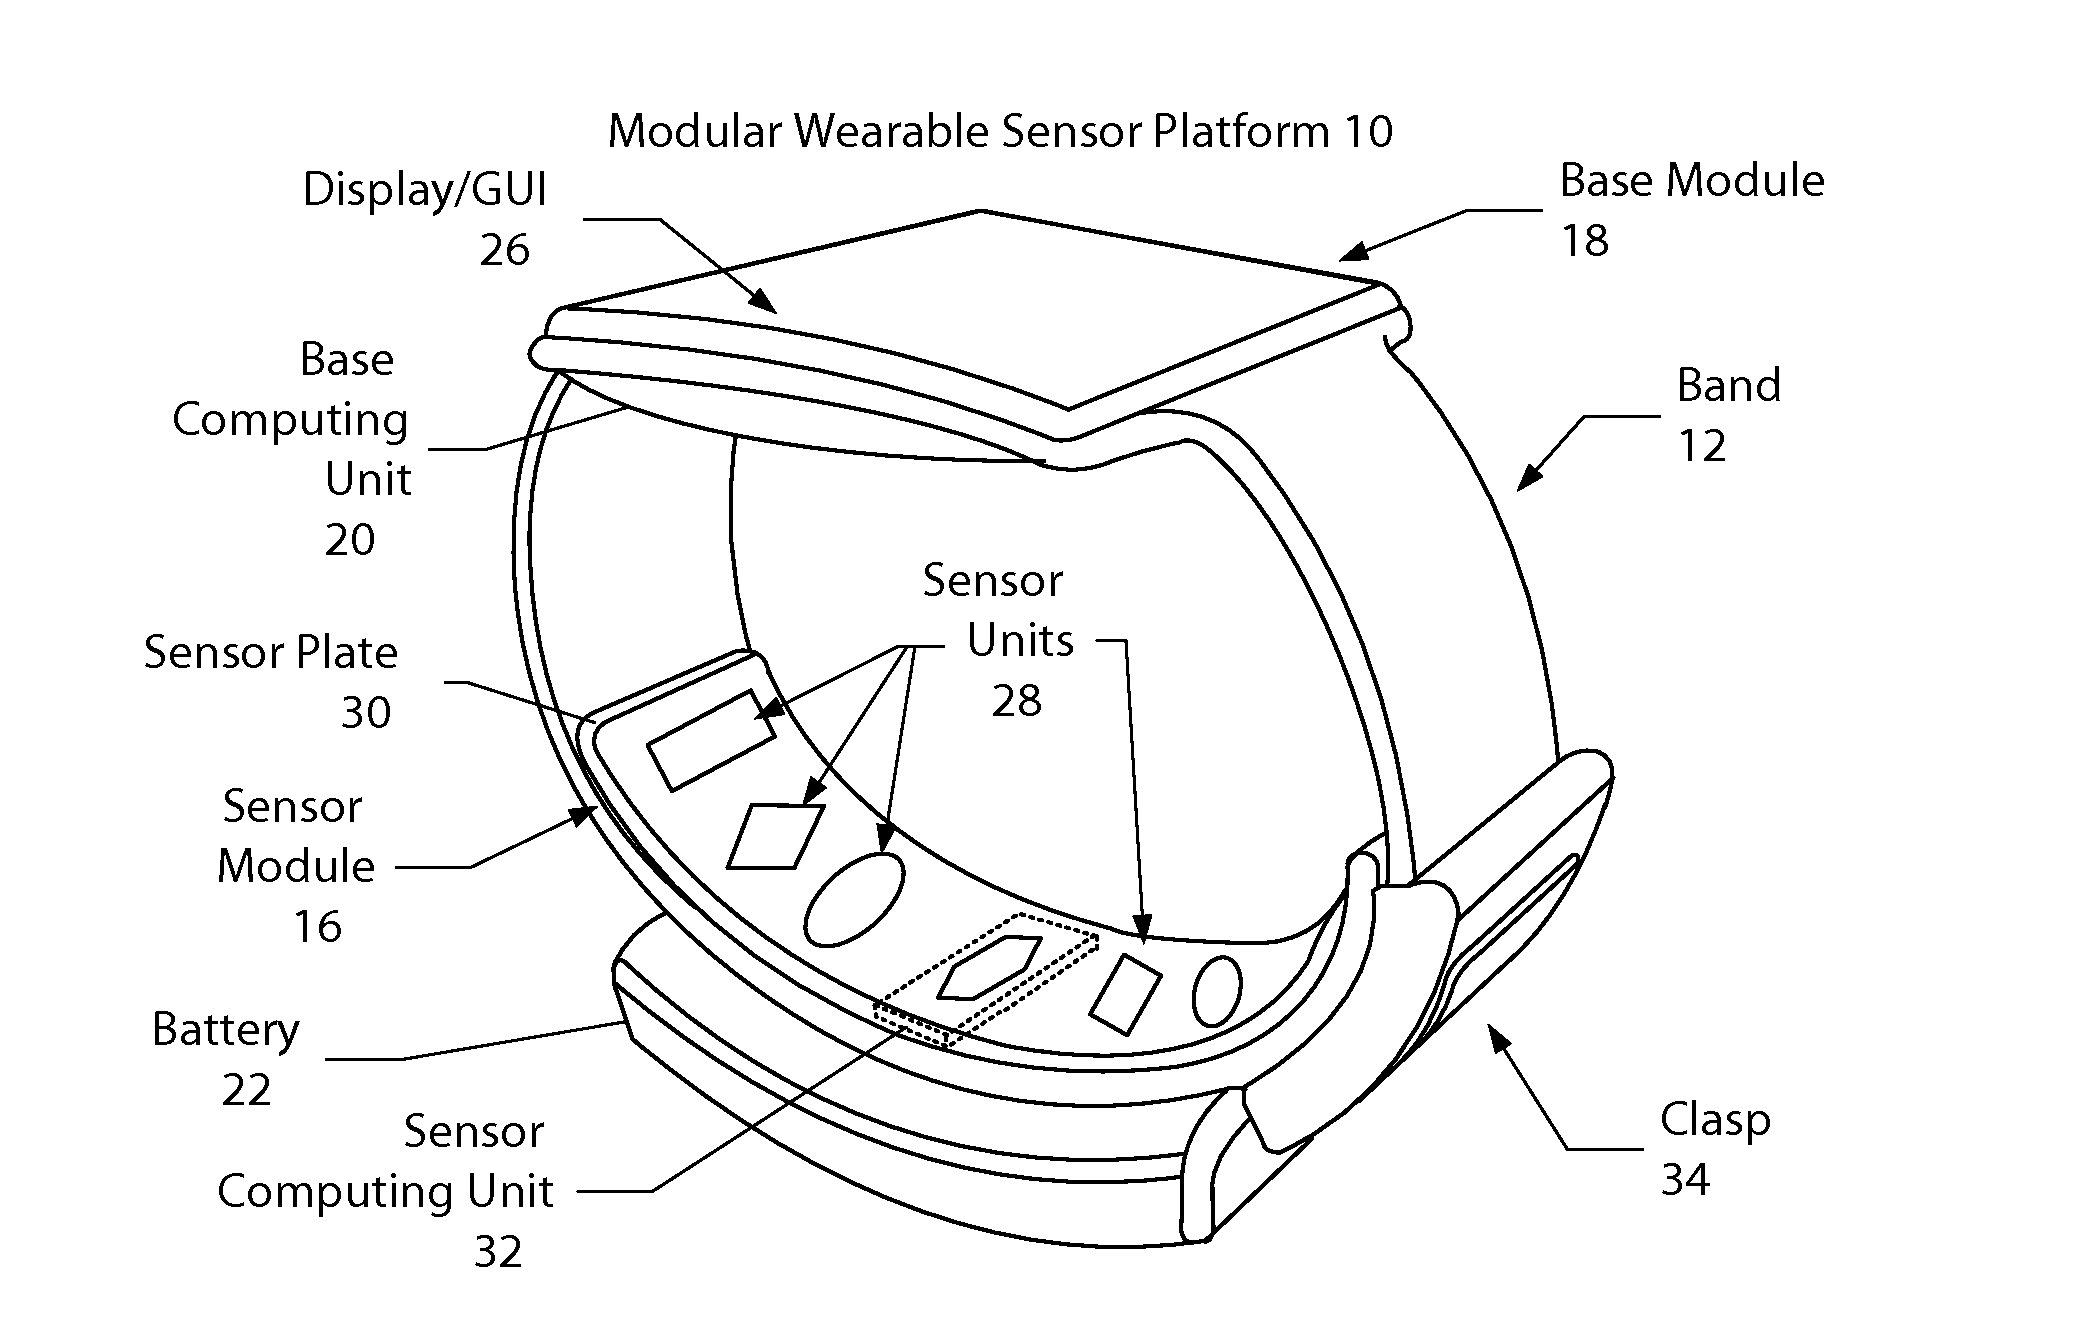 Adjustable sensor support structure for optimizing skin contact